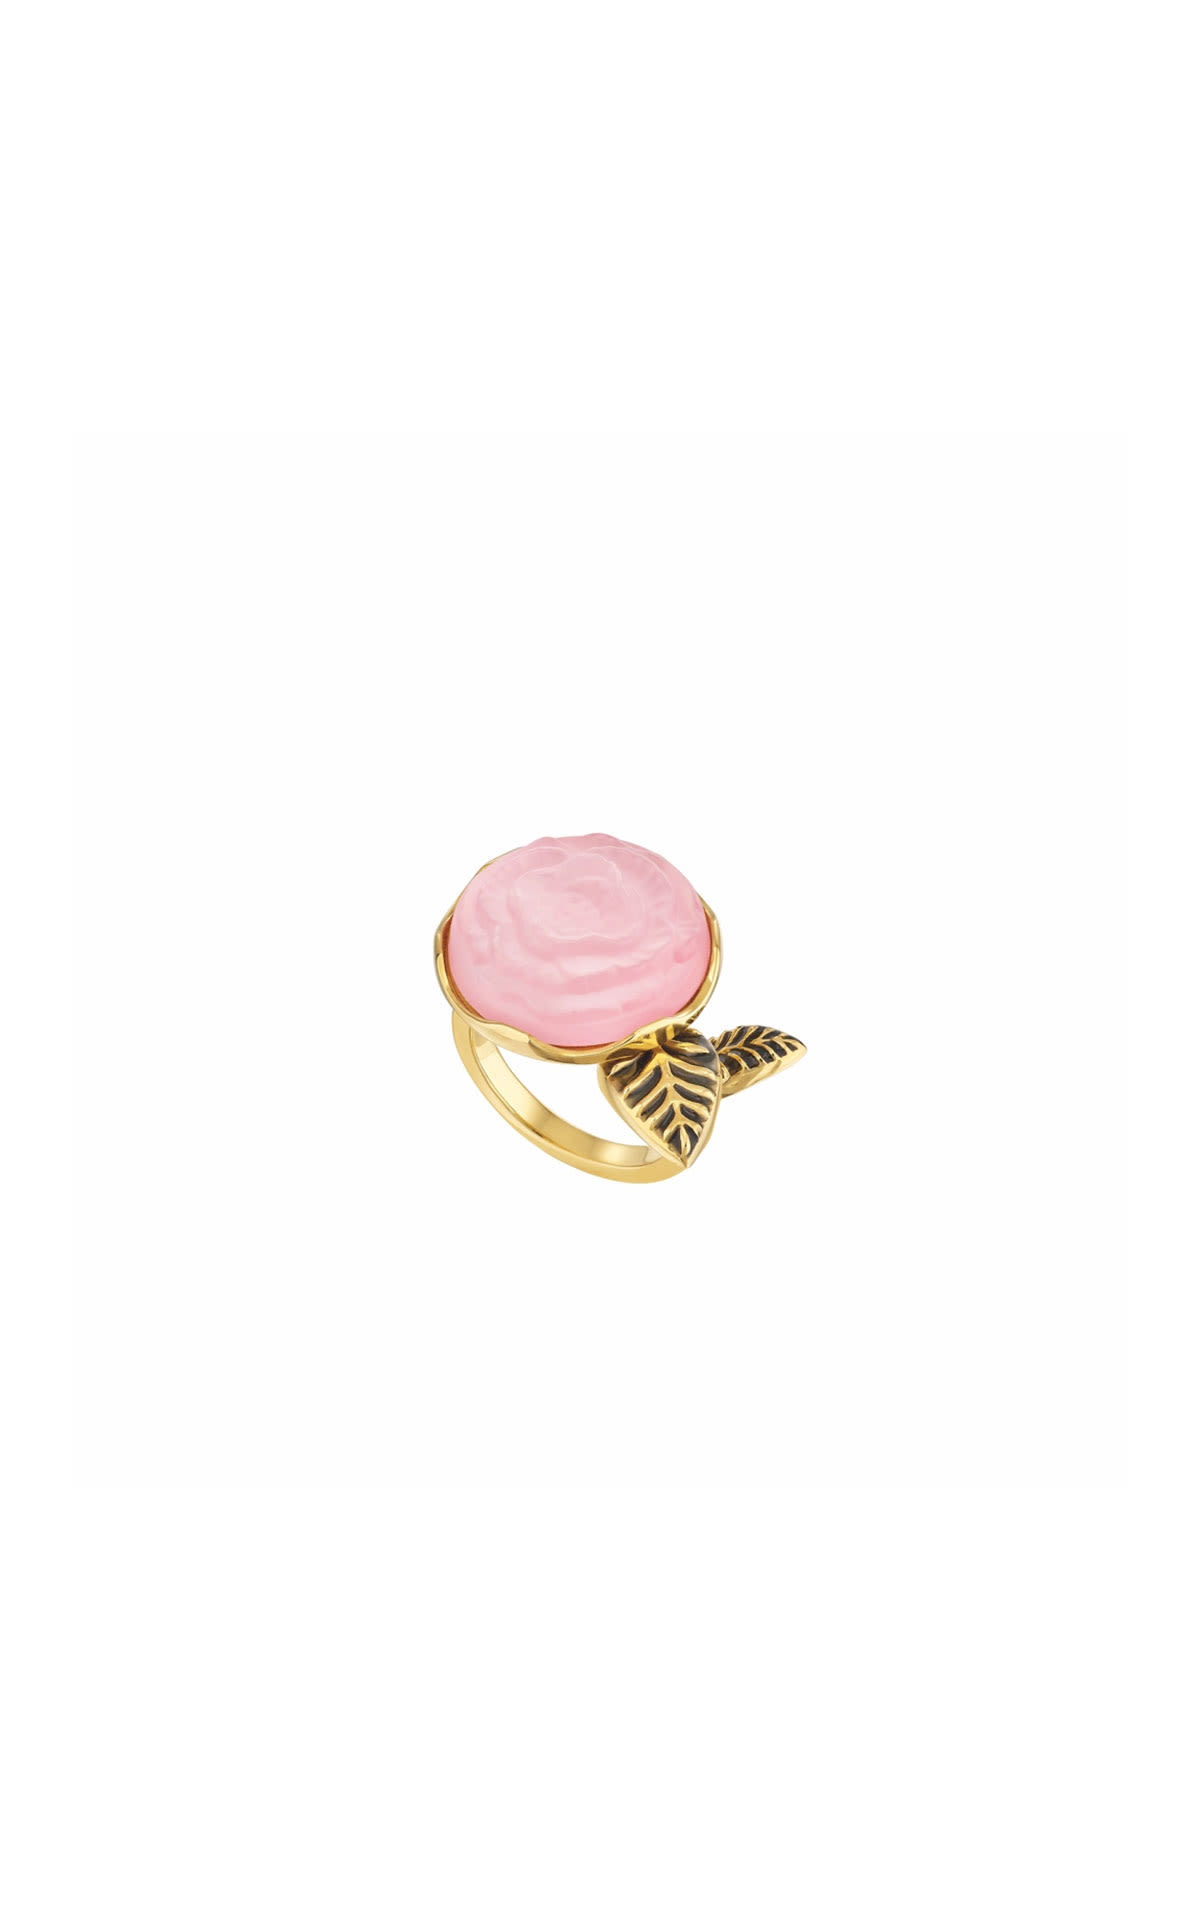 Lalique Lalique peony pink ring from Bicester Village